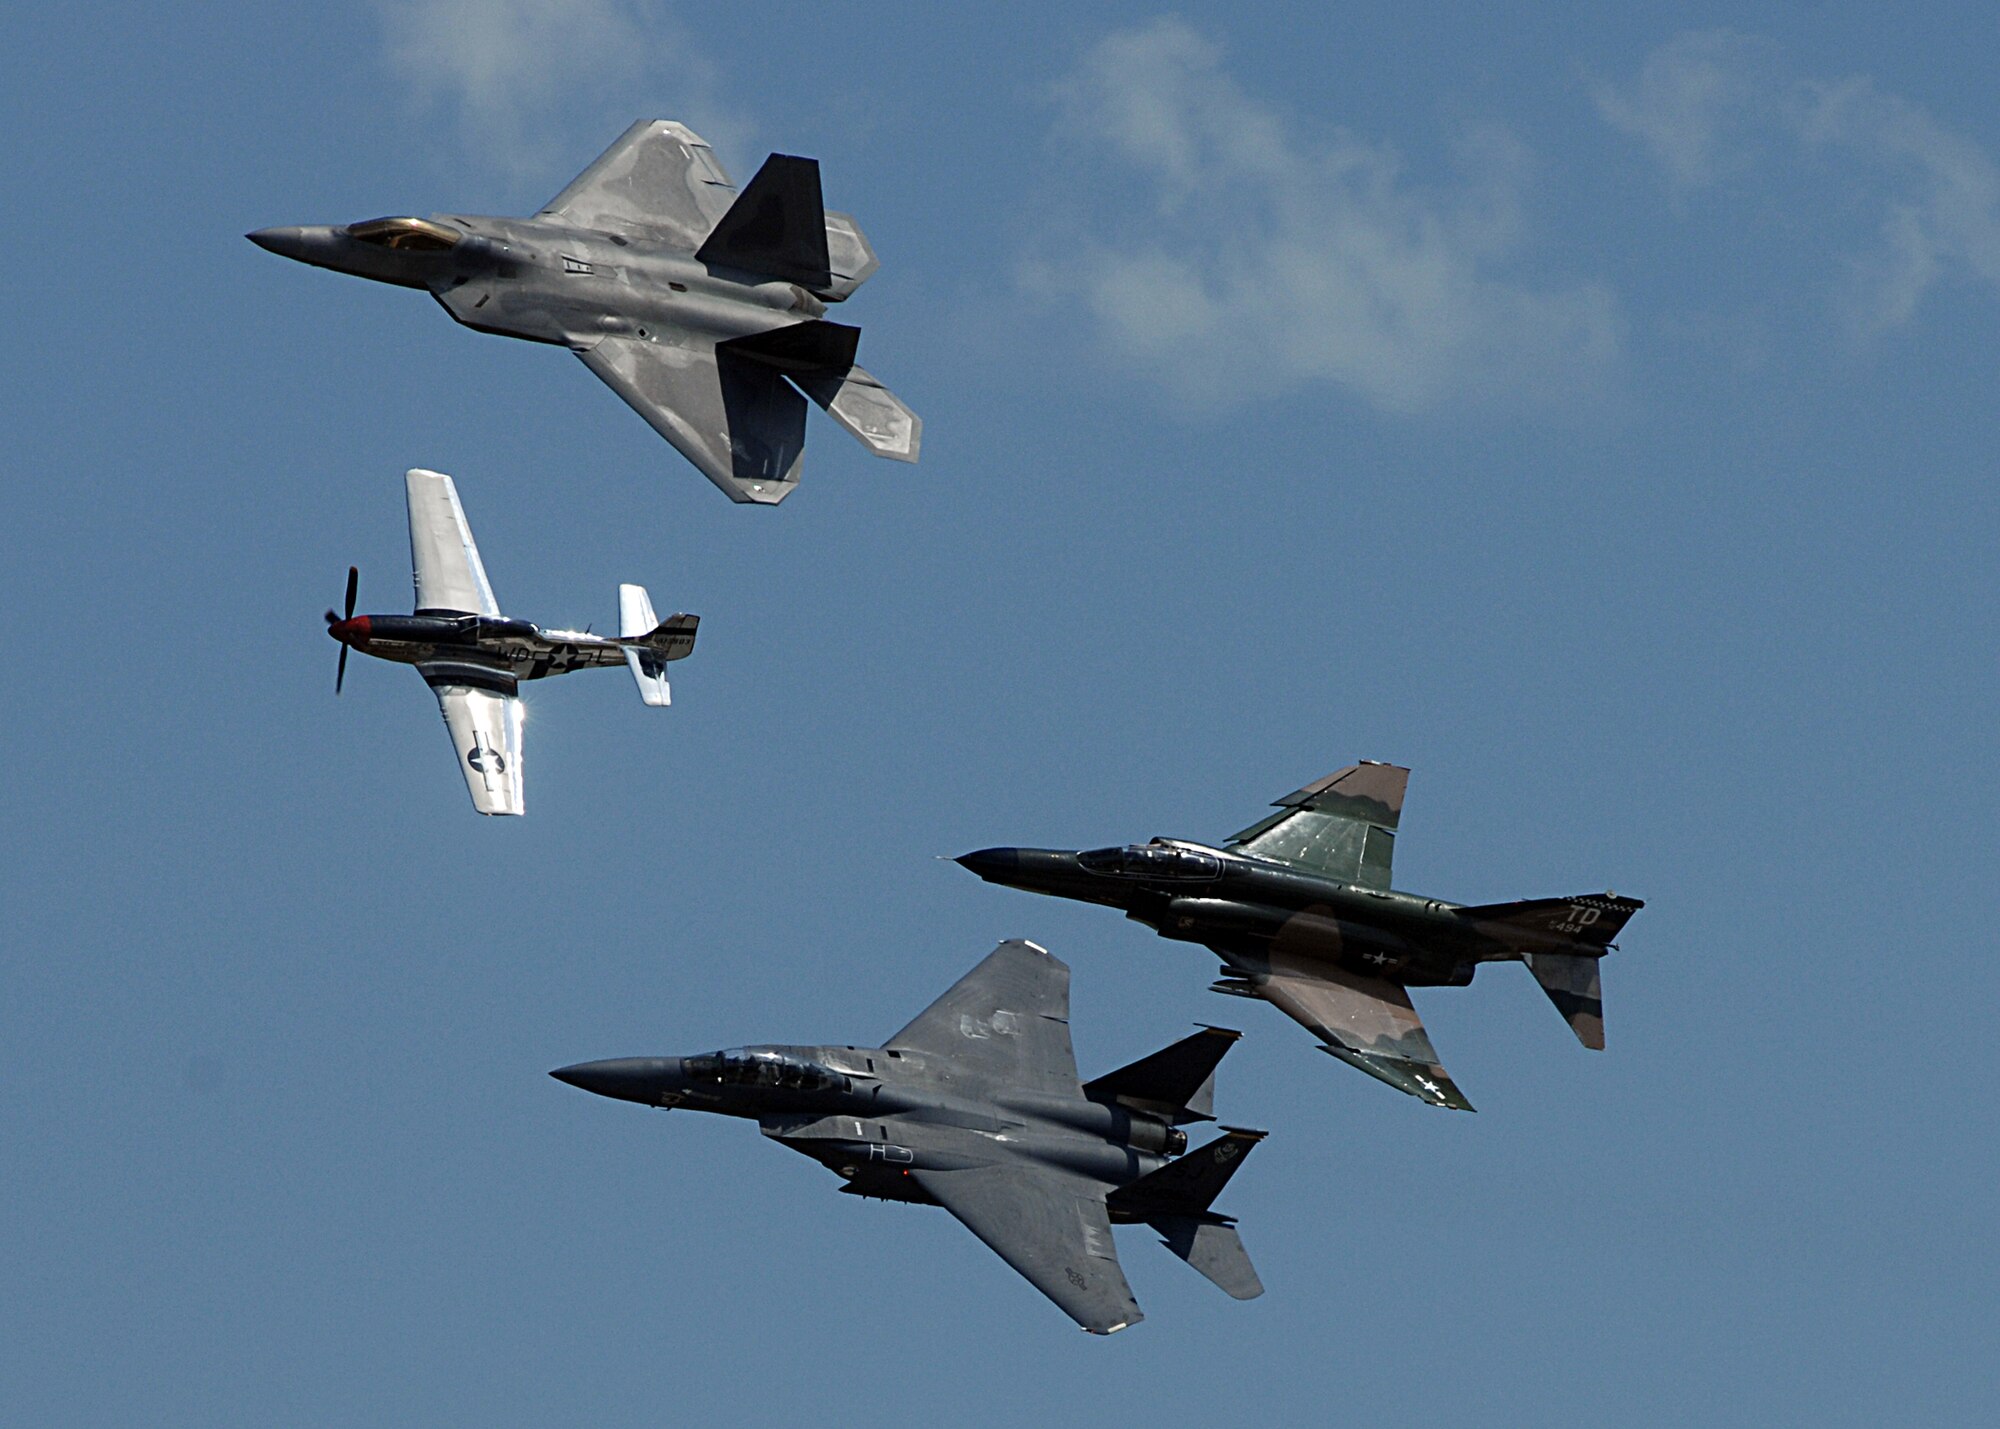 The Air Combat Command Heritage Flight took to the skies over Andrews Air Force Base, Va.,  during the Joint Service Open House May 17.  The Heritage flight consists of a P-51 Mustang (lead), a F-22A Raptor (top), a F-15E Strike Eagle and an F-4 Phantom.  The F-4s used in the Heritage flights are owned and operated by the 82nd Aerial Targets Squadron from Tyndall Air Force Base, Fla.  Photo by Amn Melissa Rodrigues.